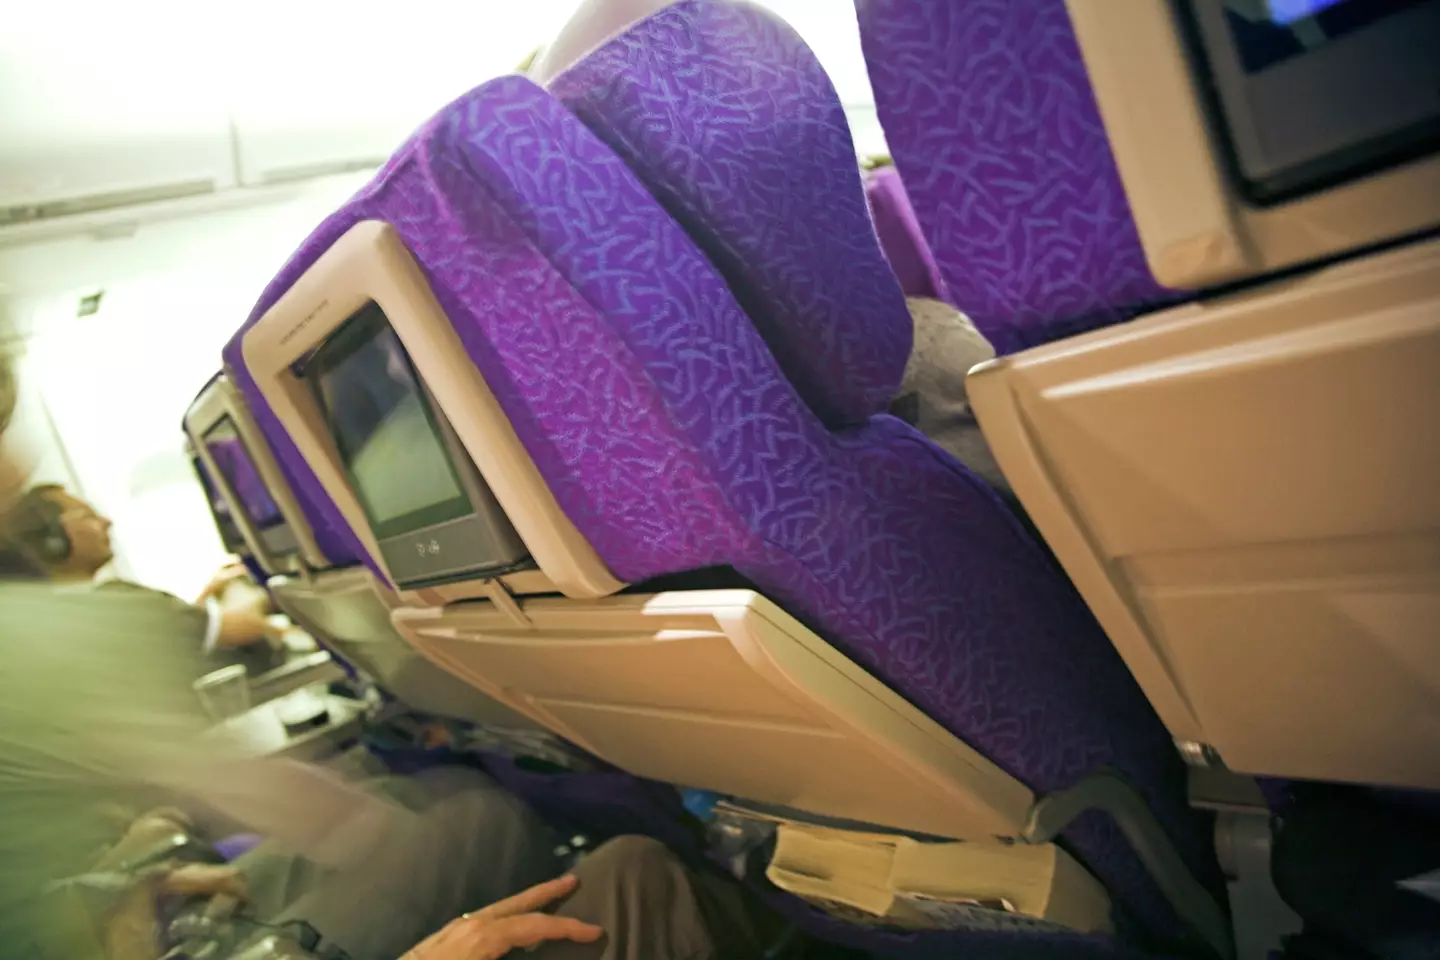 The post sparked a debate about whether it’s OK to recline your seat.